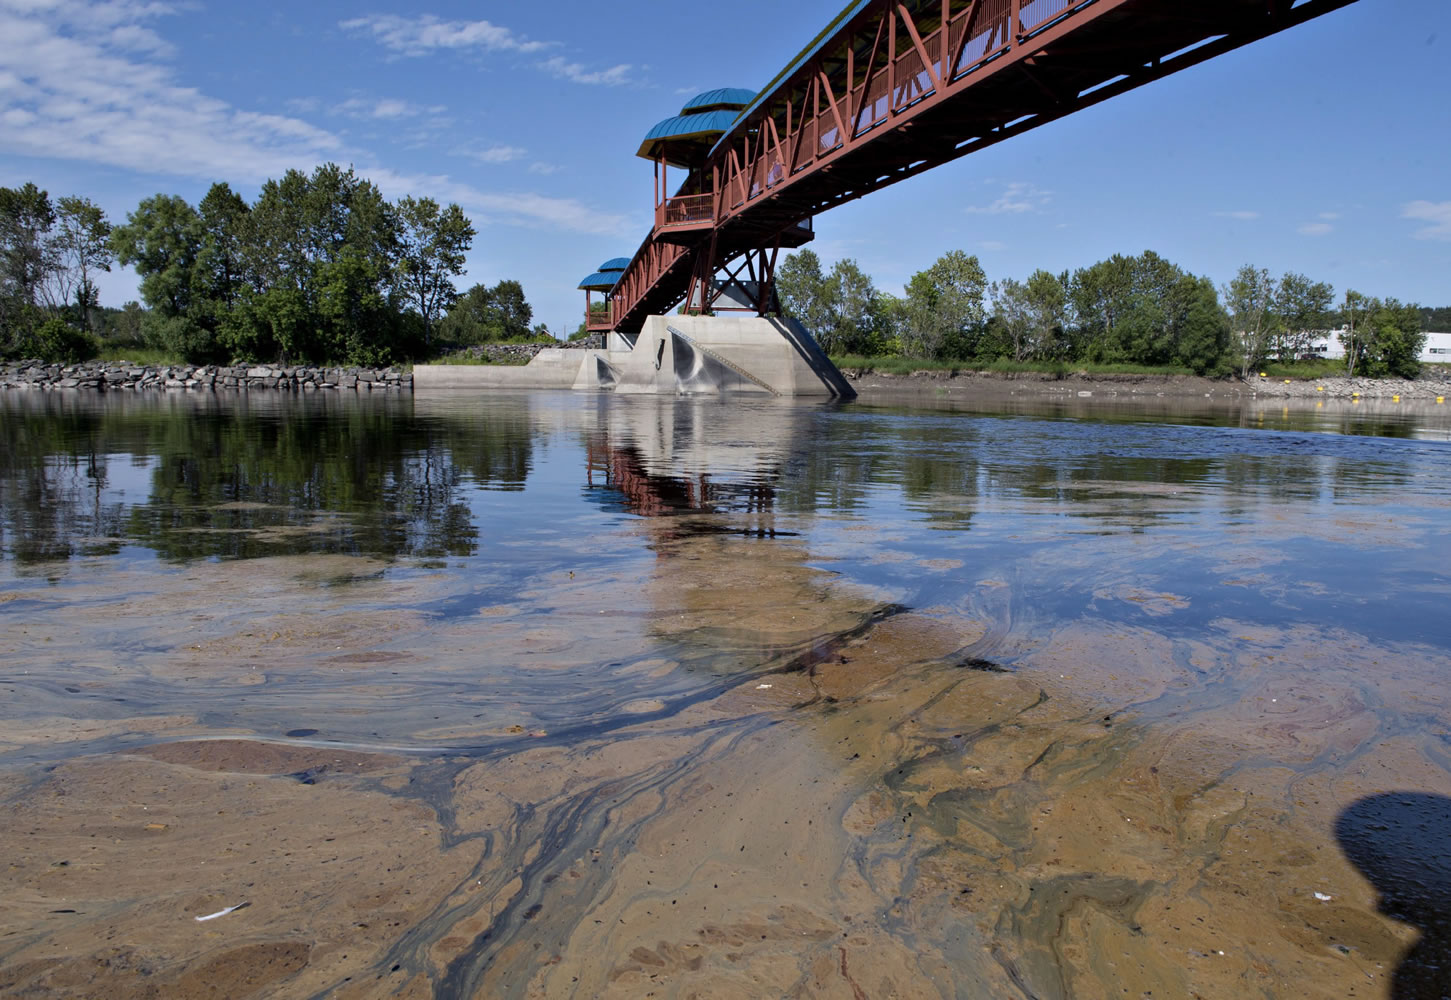 Traces of the oil spill that occurred following the runaway train derailment Saturday in Lac-Megantic, Quebec is seen about 46 miles downstream under a pedestrian bridge in the Chaudiere River at Saint-Georges, Quebec, on Monday.